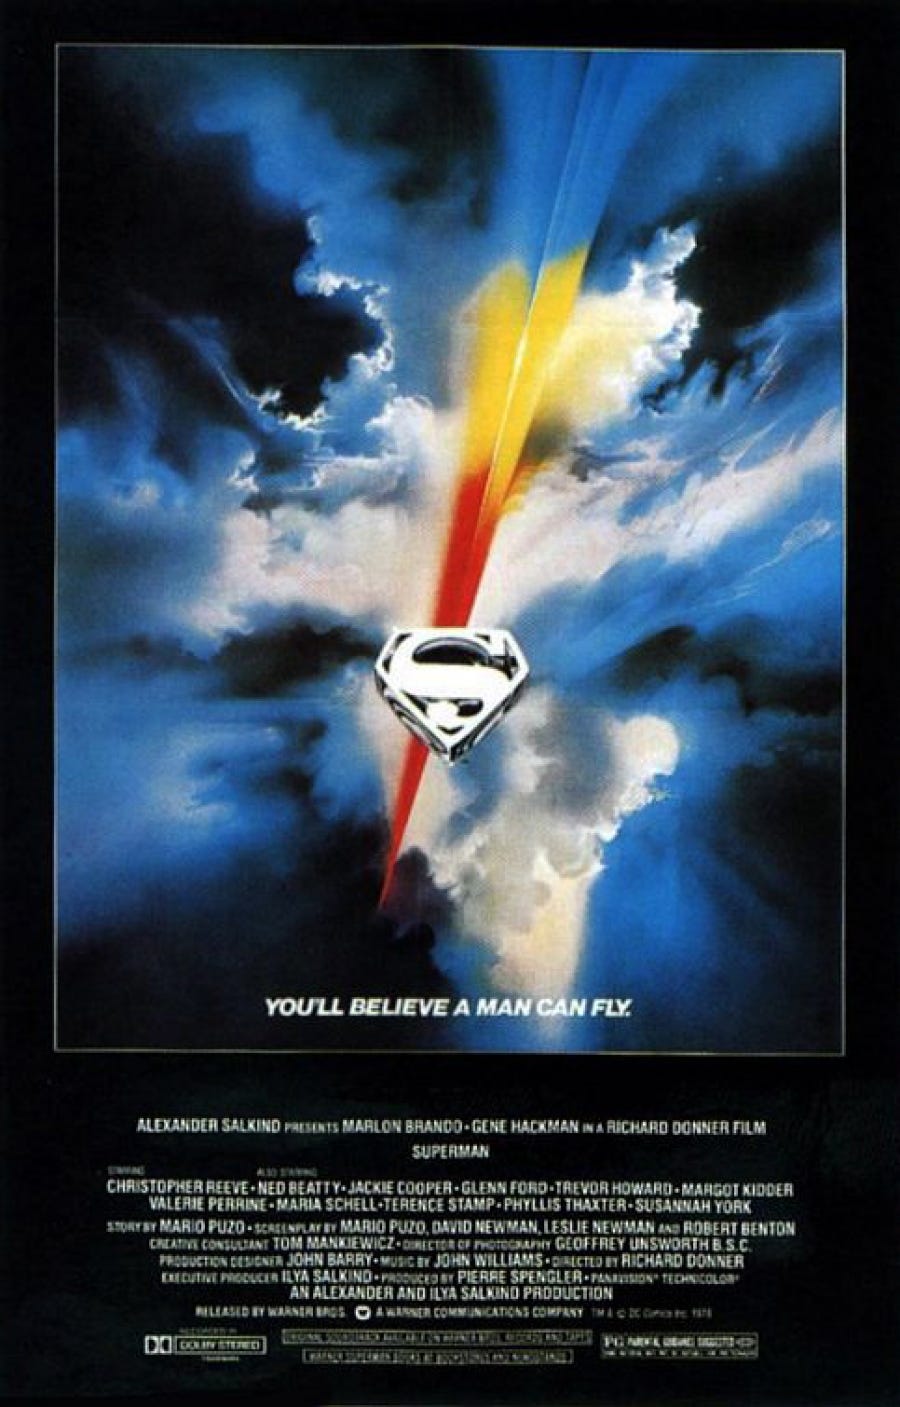 Poster from the film Superman with the text You'll believe a man can fly.